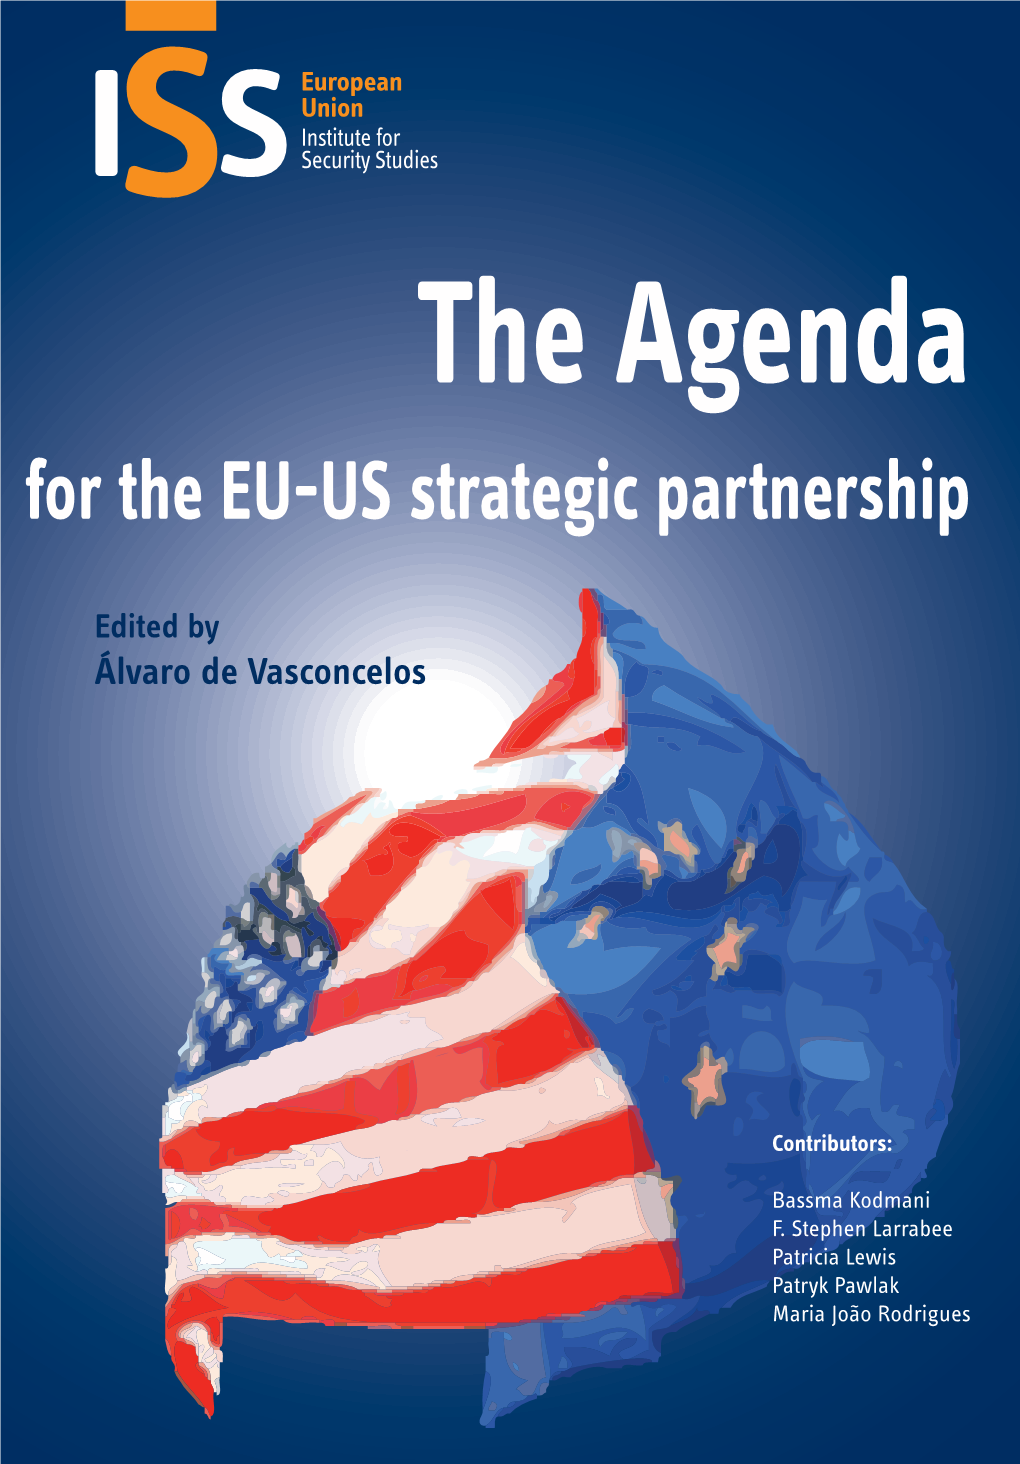 For the EU-US Strategic Partnership Internal and External Challenges Facing Both Europe and the United States